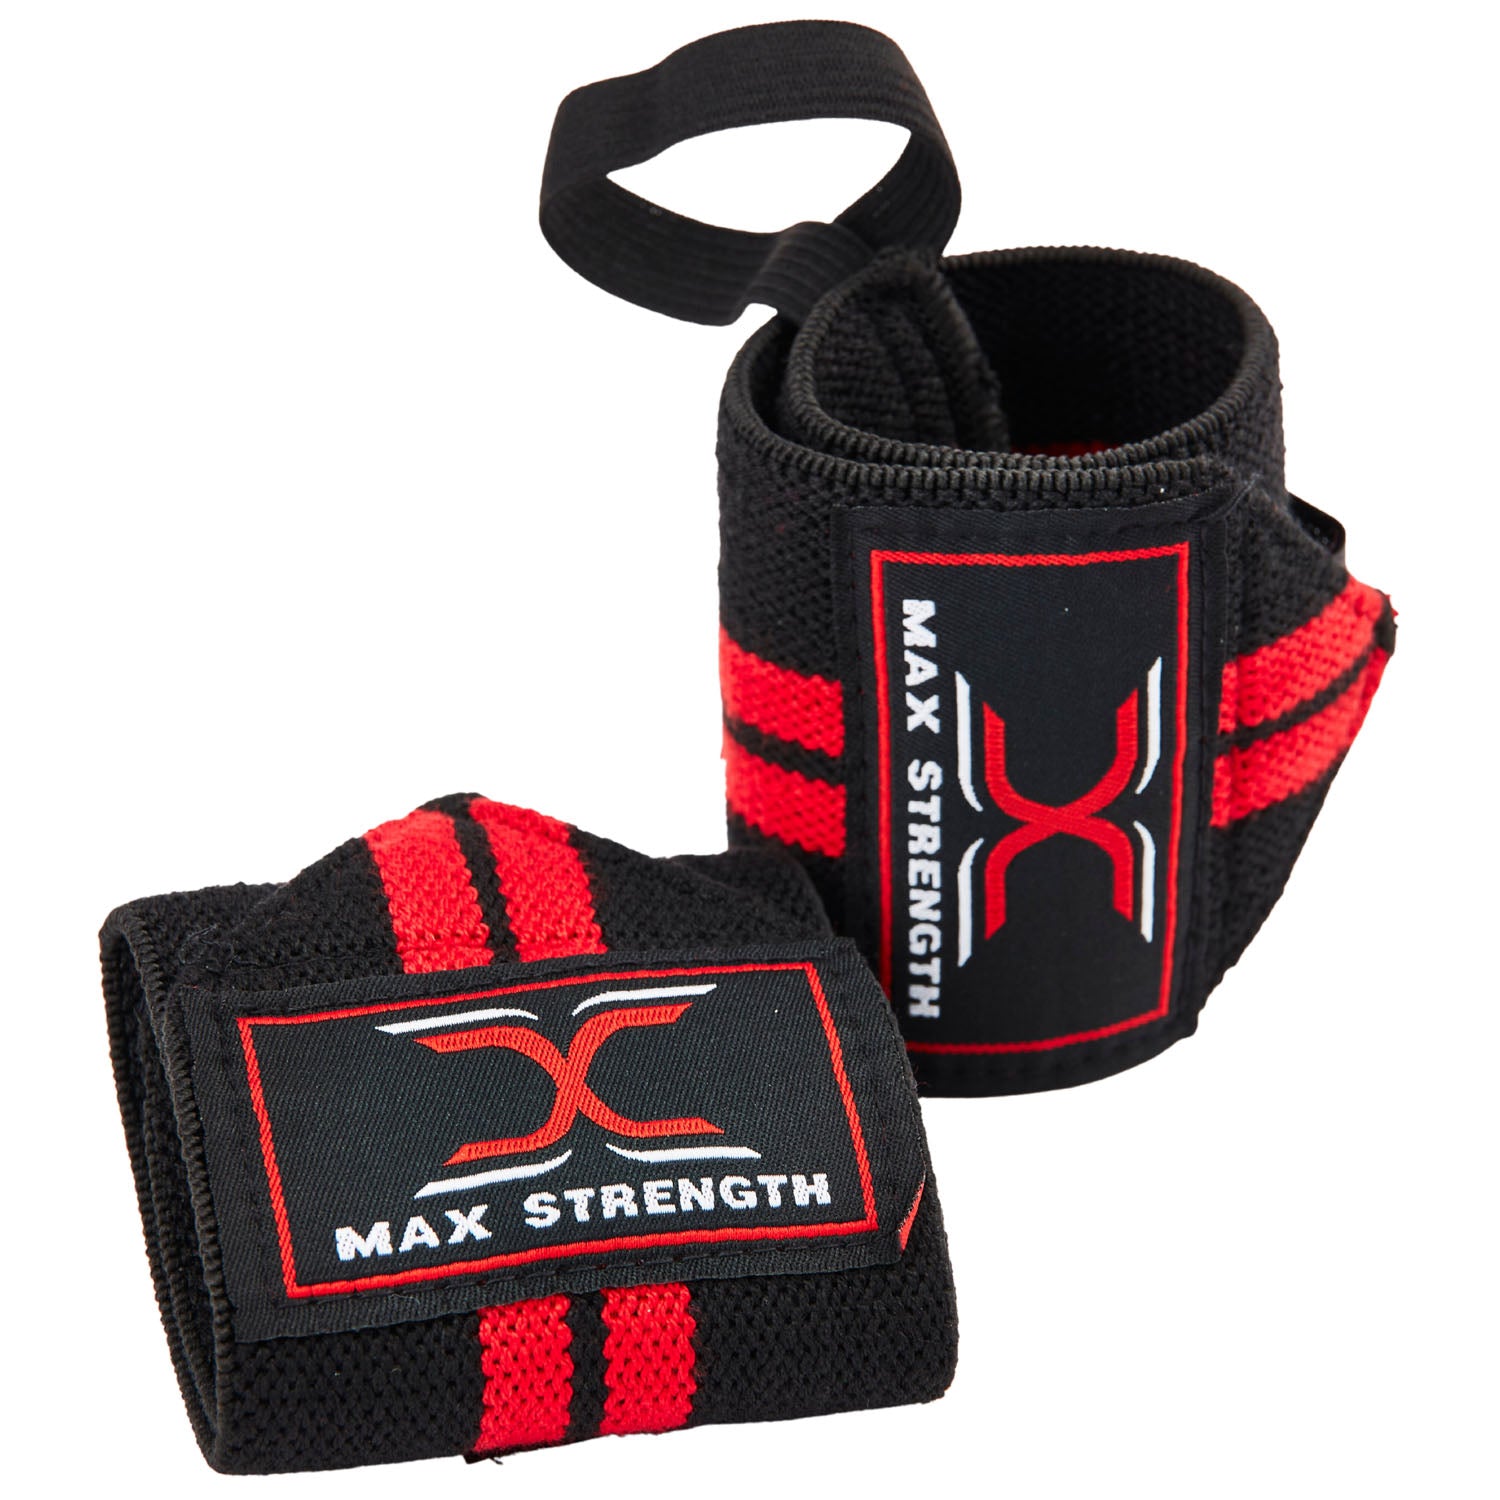 Red wrist support strap